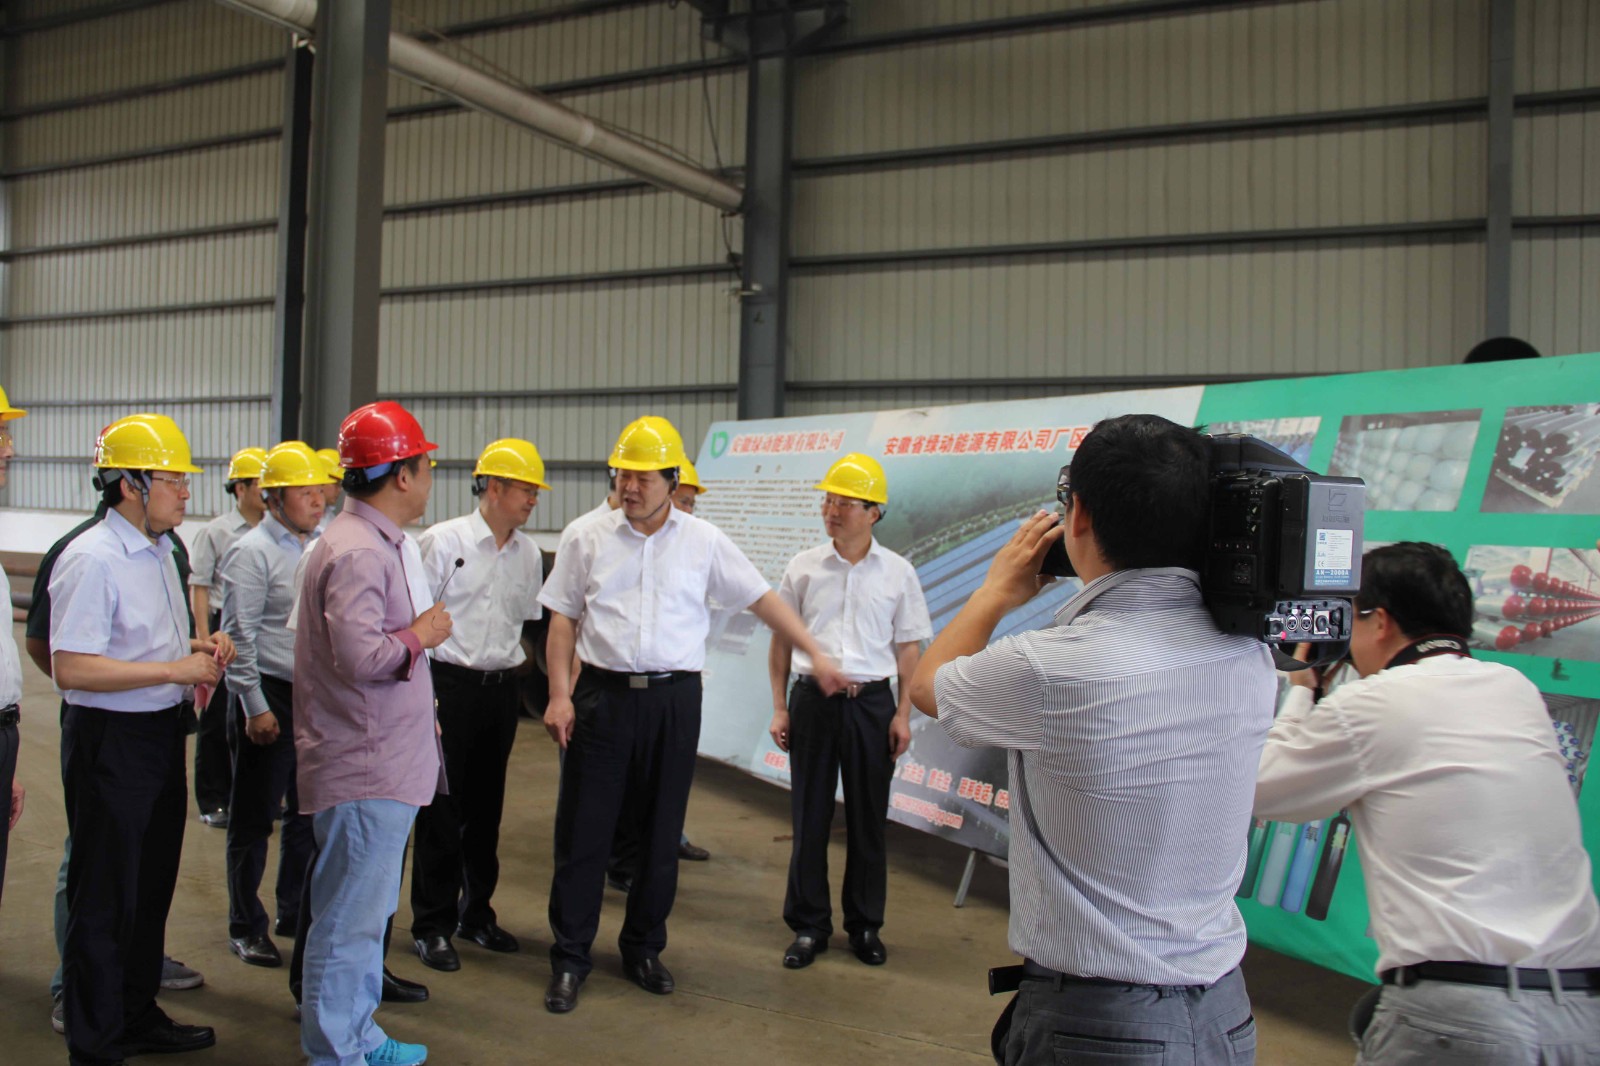 The deputy governor of Anhui Province and his delegation visited our company to inspect and guide the work